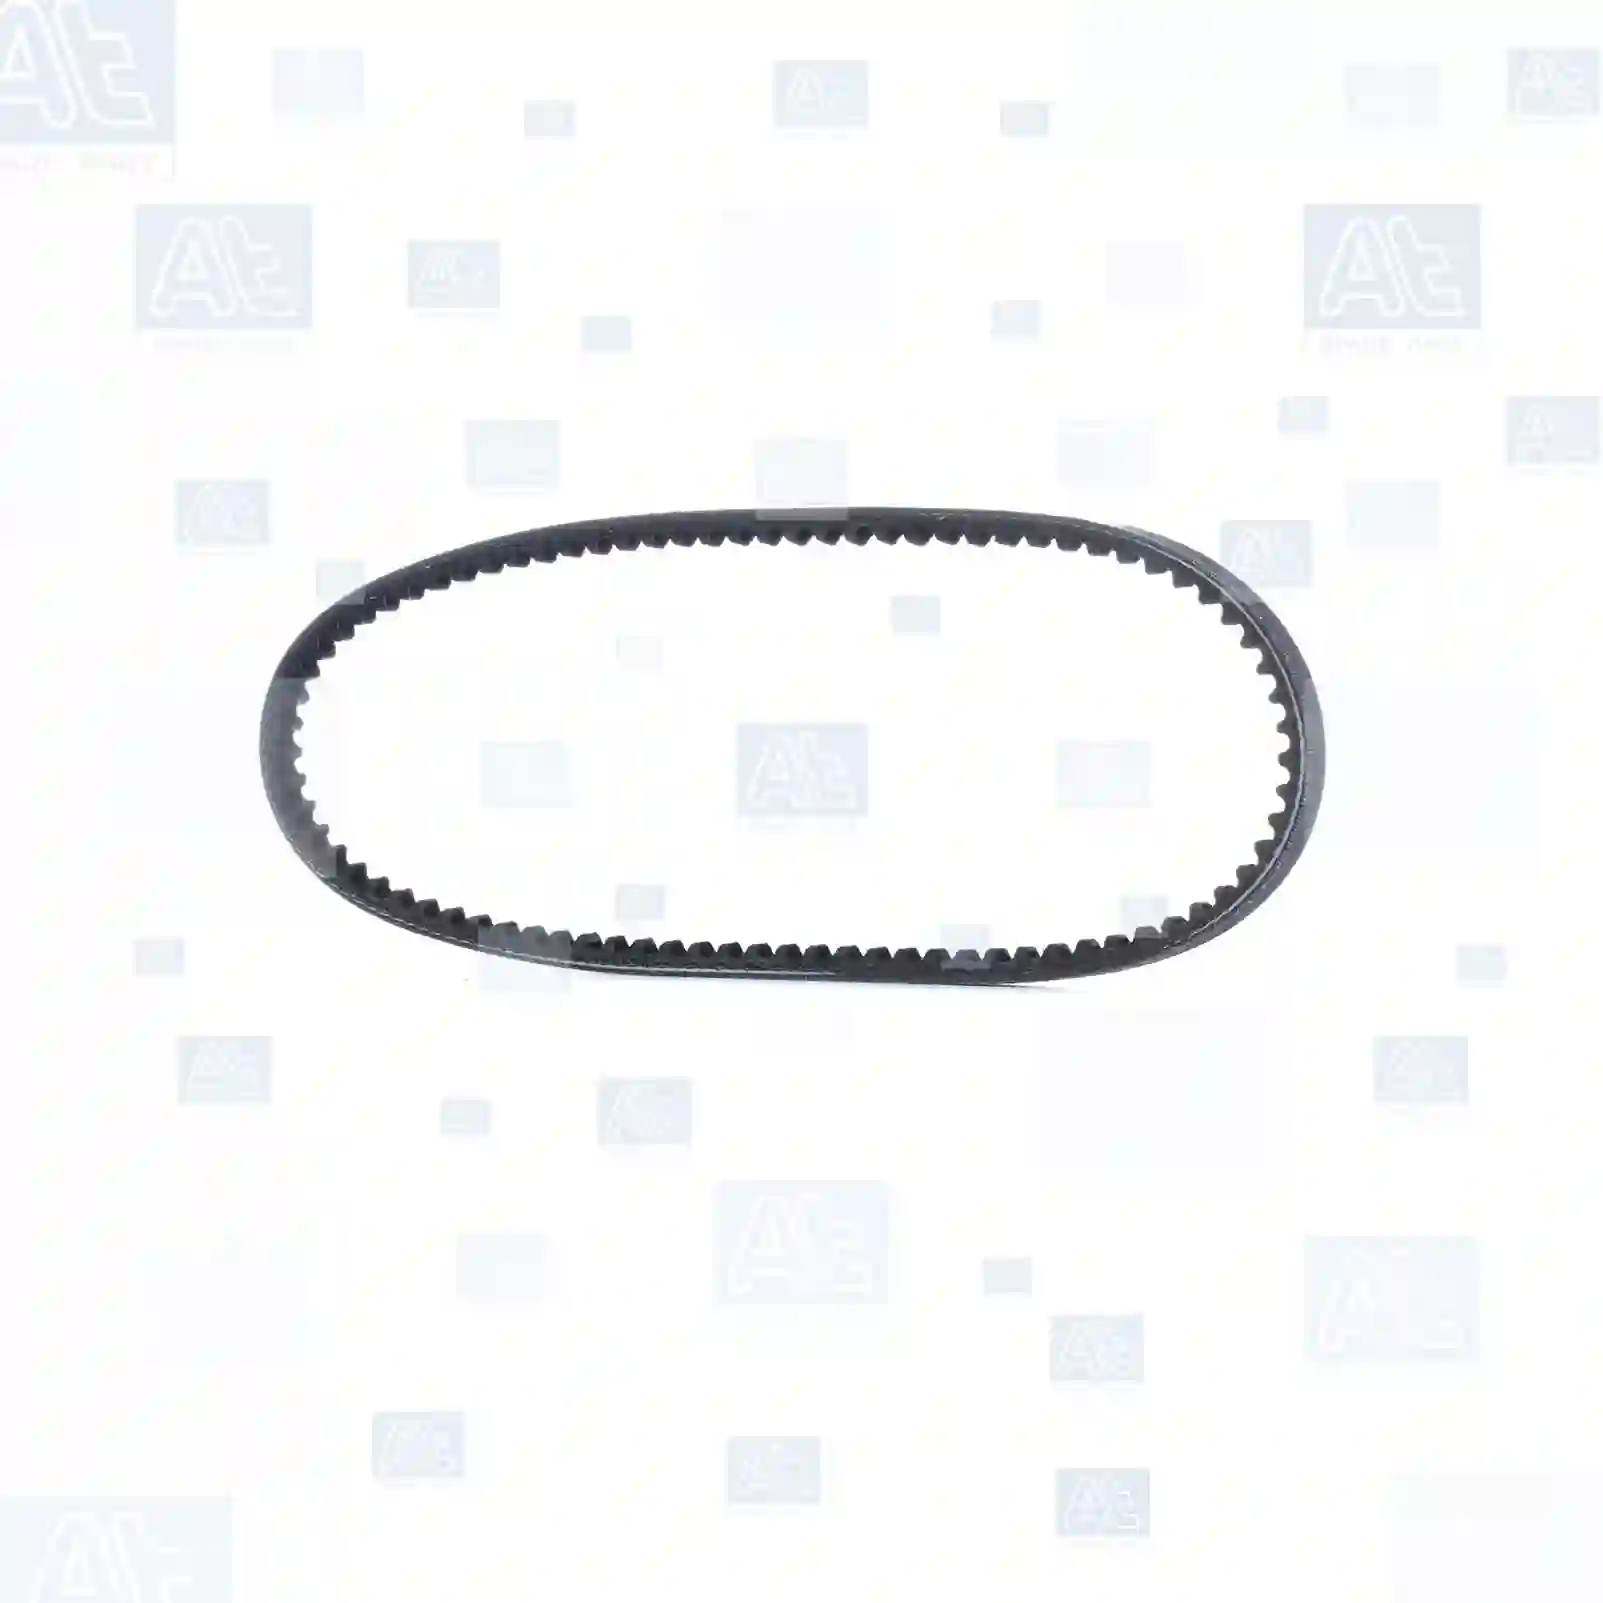 V-belt, at no 77707616, oem no: 7700321502, 613602, GFB211, 2696274, 2696275, 8835275, 8839164, 9966579, 9966580, 5000033113, 5000048794, 5000049301, GFB202, B0015491, 575015, 7700521502, 0106920, 106920, 611023, ST01225, 2128751, 2863564, 5012331, 91074366, 9966580, 3132523R1, 04749911, 4749911, 82336411, 613602, 613602, GFB211, 613602, GFB211, 386061, 575015, 2128751, 539130, 2724E8A602B, 5000041122, 5000044031, 5000048793, 5000048794, 5000049301, 5000133113, 5000297763, 5000686360, 7700006809, 7700525076, 7700549230, 7700664248, 7700670935, 7701029709, 611023, 613602, GFB202, GFB211, 5000041122, 5000044031, 5000048793, 5000048794, 5000049301, 5000133113, 613602, GFB211, 958315 At Spare Part | Engine, Accelerator Pedal, Camshaft, Connecting Rod, Crankcase, Crankshaft, Cylinder Head, Engine Suspension Mountings, Exhaust Manifold, Exhaust Gas Recirculation, Filter Kits, Flywheel Housing, General Overhaul Kits, Engine, Intake Manifold, Oil Cleaner, Oil Cooler, Oil Filter, Oil Pump, Oil Sump, Piston & Liner, Sensor & Switch, Timing Case, Turbocharger, Cooling System, Belt Tensioner, Coolant Filter, Coolant Pipe, Corrosion Prevention Agent, Drive, Expansion Tank, Fan, Intercooler, Monitors & Gauges, Radiator, Thermostat, V-Belt / Timing belt, Water Pump, Fuel System, Electronical Injector Unit, Feed Pump, Fuel Filter, cpl., Fuel Gauge Sender,  Fuel Line, Fuel Pump, Fuel Tank, Injection Line Kit, Injection Pump, Exhaust System, Clutch & Pedal, Gearbox, Propeller Shaft, Axles, Brake System, Hubs & Wheels, Suspension, Leaf Spring, Universal Parts / Accessories, Steering, Electrical System, Cabin V-belt, at no 77707616, oem no: 7700321502, 613602, GFB211, 2696274, 2696275, 8835275, 8839164, 9966579, 9966580, 5000033113, 5000048794, 5000049301, GFB202, B0015491, 575015, 7700521502, 0106920, 106920, 611023, ST01225, 2128751, 2863564, 5012331, 91074366, 9966580, 3132523R1, 04749911, 4749911, 82336411, 613602, 613602, GFB211, 613602, GFB211, 386061, 575015, 2128751, 539130, 2724E8A602B, 5000041122, 5000044031, 5000048793, 5000048794, 5000049301, 5000133113, 5000297763, 5000686360, 7700006809, 7700525076, 7700549230, 7700664248, 7700670935, 7701029709, 611023, 613602, GFB202, GFB211, 5000041122, 5000044031, 5000048793, 5000048794, 5000049301, 5000133113, 613602, GFB211, 958315 At Spare Part | Engine, Accelerator Pedal, Camshaft, Connecting Rod, Crankcase, Crankshaft, Cylinder Head, Engine Suspension Mountings, Exhaust Manifold, Exhaust Gas Recirculation, Filter Kits, Flywheel Housing, General Overhaul Kits, Engine, Intake Manifold, Oil Cleaner, Oil Cooler, Oil Filter, Oil Pump, Oil Sump, Piston & Liner, Sensor & Switch, Timing Case, Turbocharger, Cooling System, Belt Tensioner, Coolant Filter, Coolant Pipe, Corrosion Prevention Agent, Drive, Expansion Tank, Fan, Intercooler, Monitors & Gauges, Radiator, Thermostat, V-Belt / Timing belt, Water Pump, Fuel System, Electronical Injector Unit, Feed Pump, Fuel Filter, cpl., Fuel Gauge Sender,  Fuel Line, Fuel Pump, Fuel Tank, Injection Line Kit, Injection Pump, Exhaust System, Clutch & Pedal, Gearbox, Propeller Shaft, Axles, Brake System, Hubs & Wheels, Suspension, Leaf Spring, Universal Parts / Accessories, Steering, Electrical System, Cabin